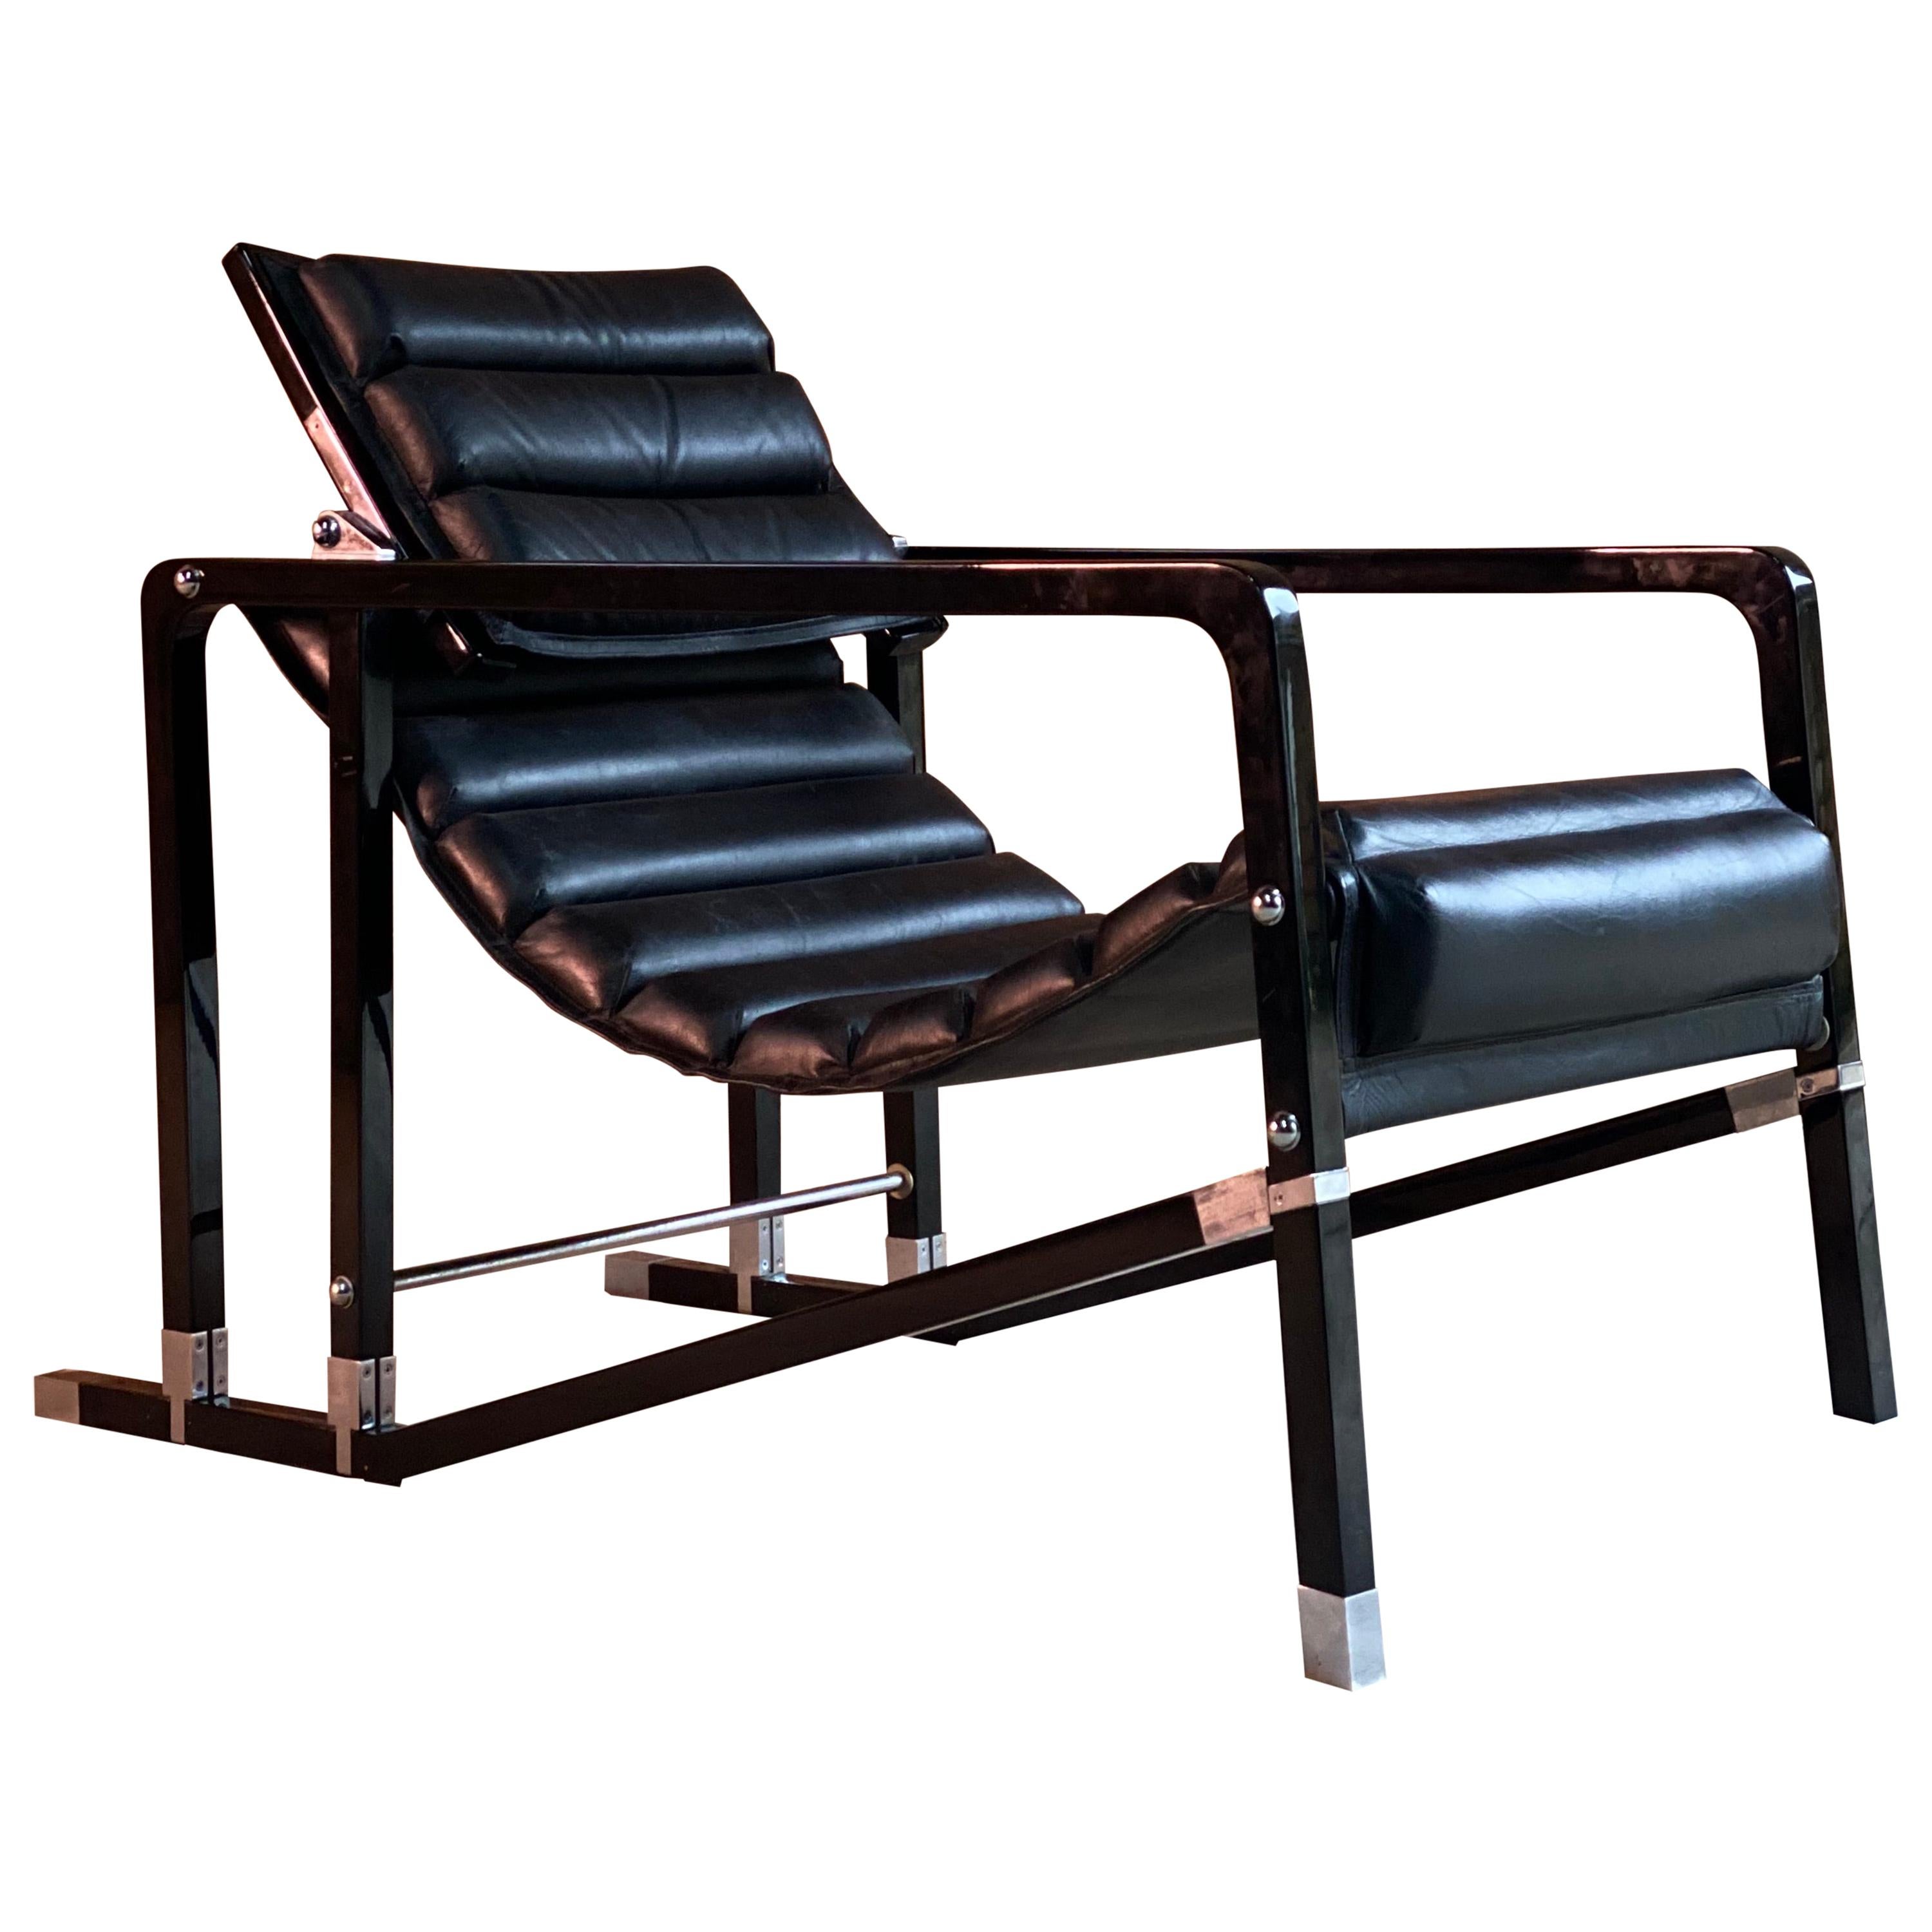 Eileen Gray Transat Chair in Black Leather Black Lacquer by Ecart, circa 2000